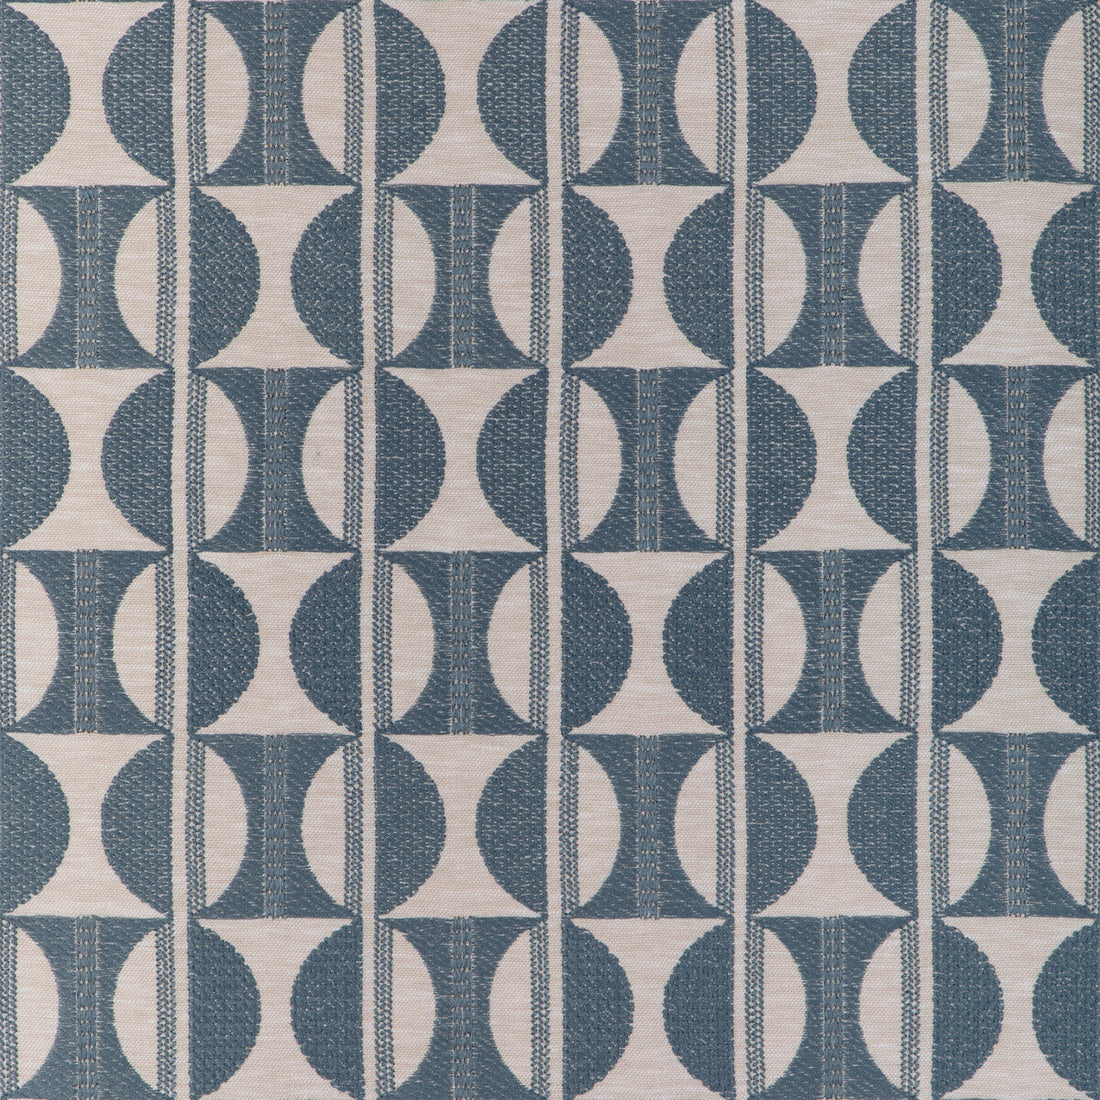 Kravet Basics fabric in 37157-516 color - pattern 37157.516.0 - by Kravet Basics in the Modern Embroideries III collection